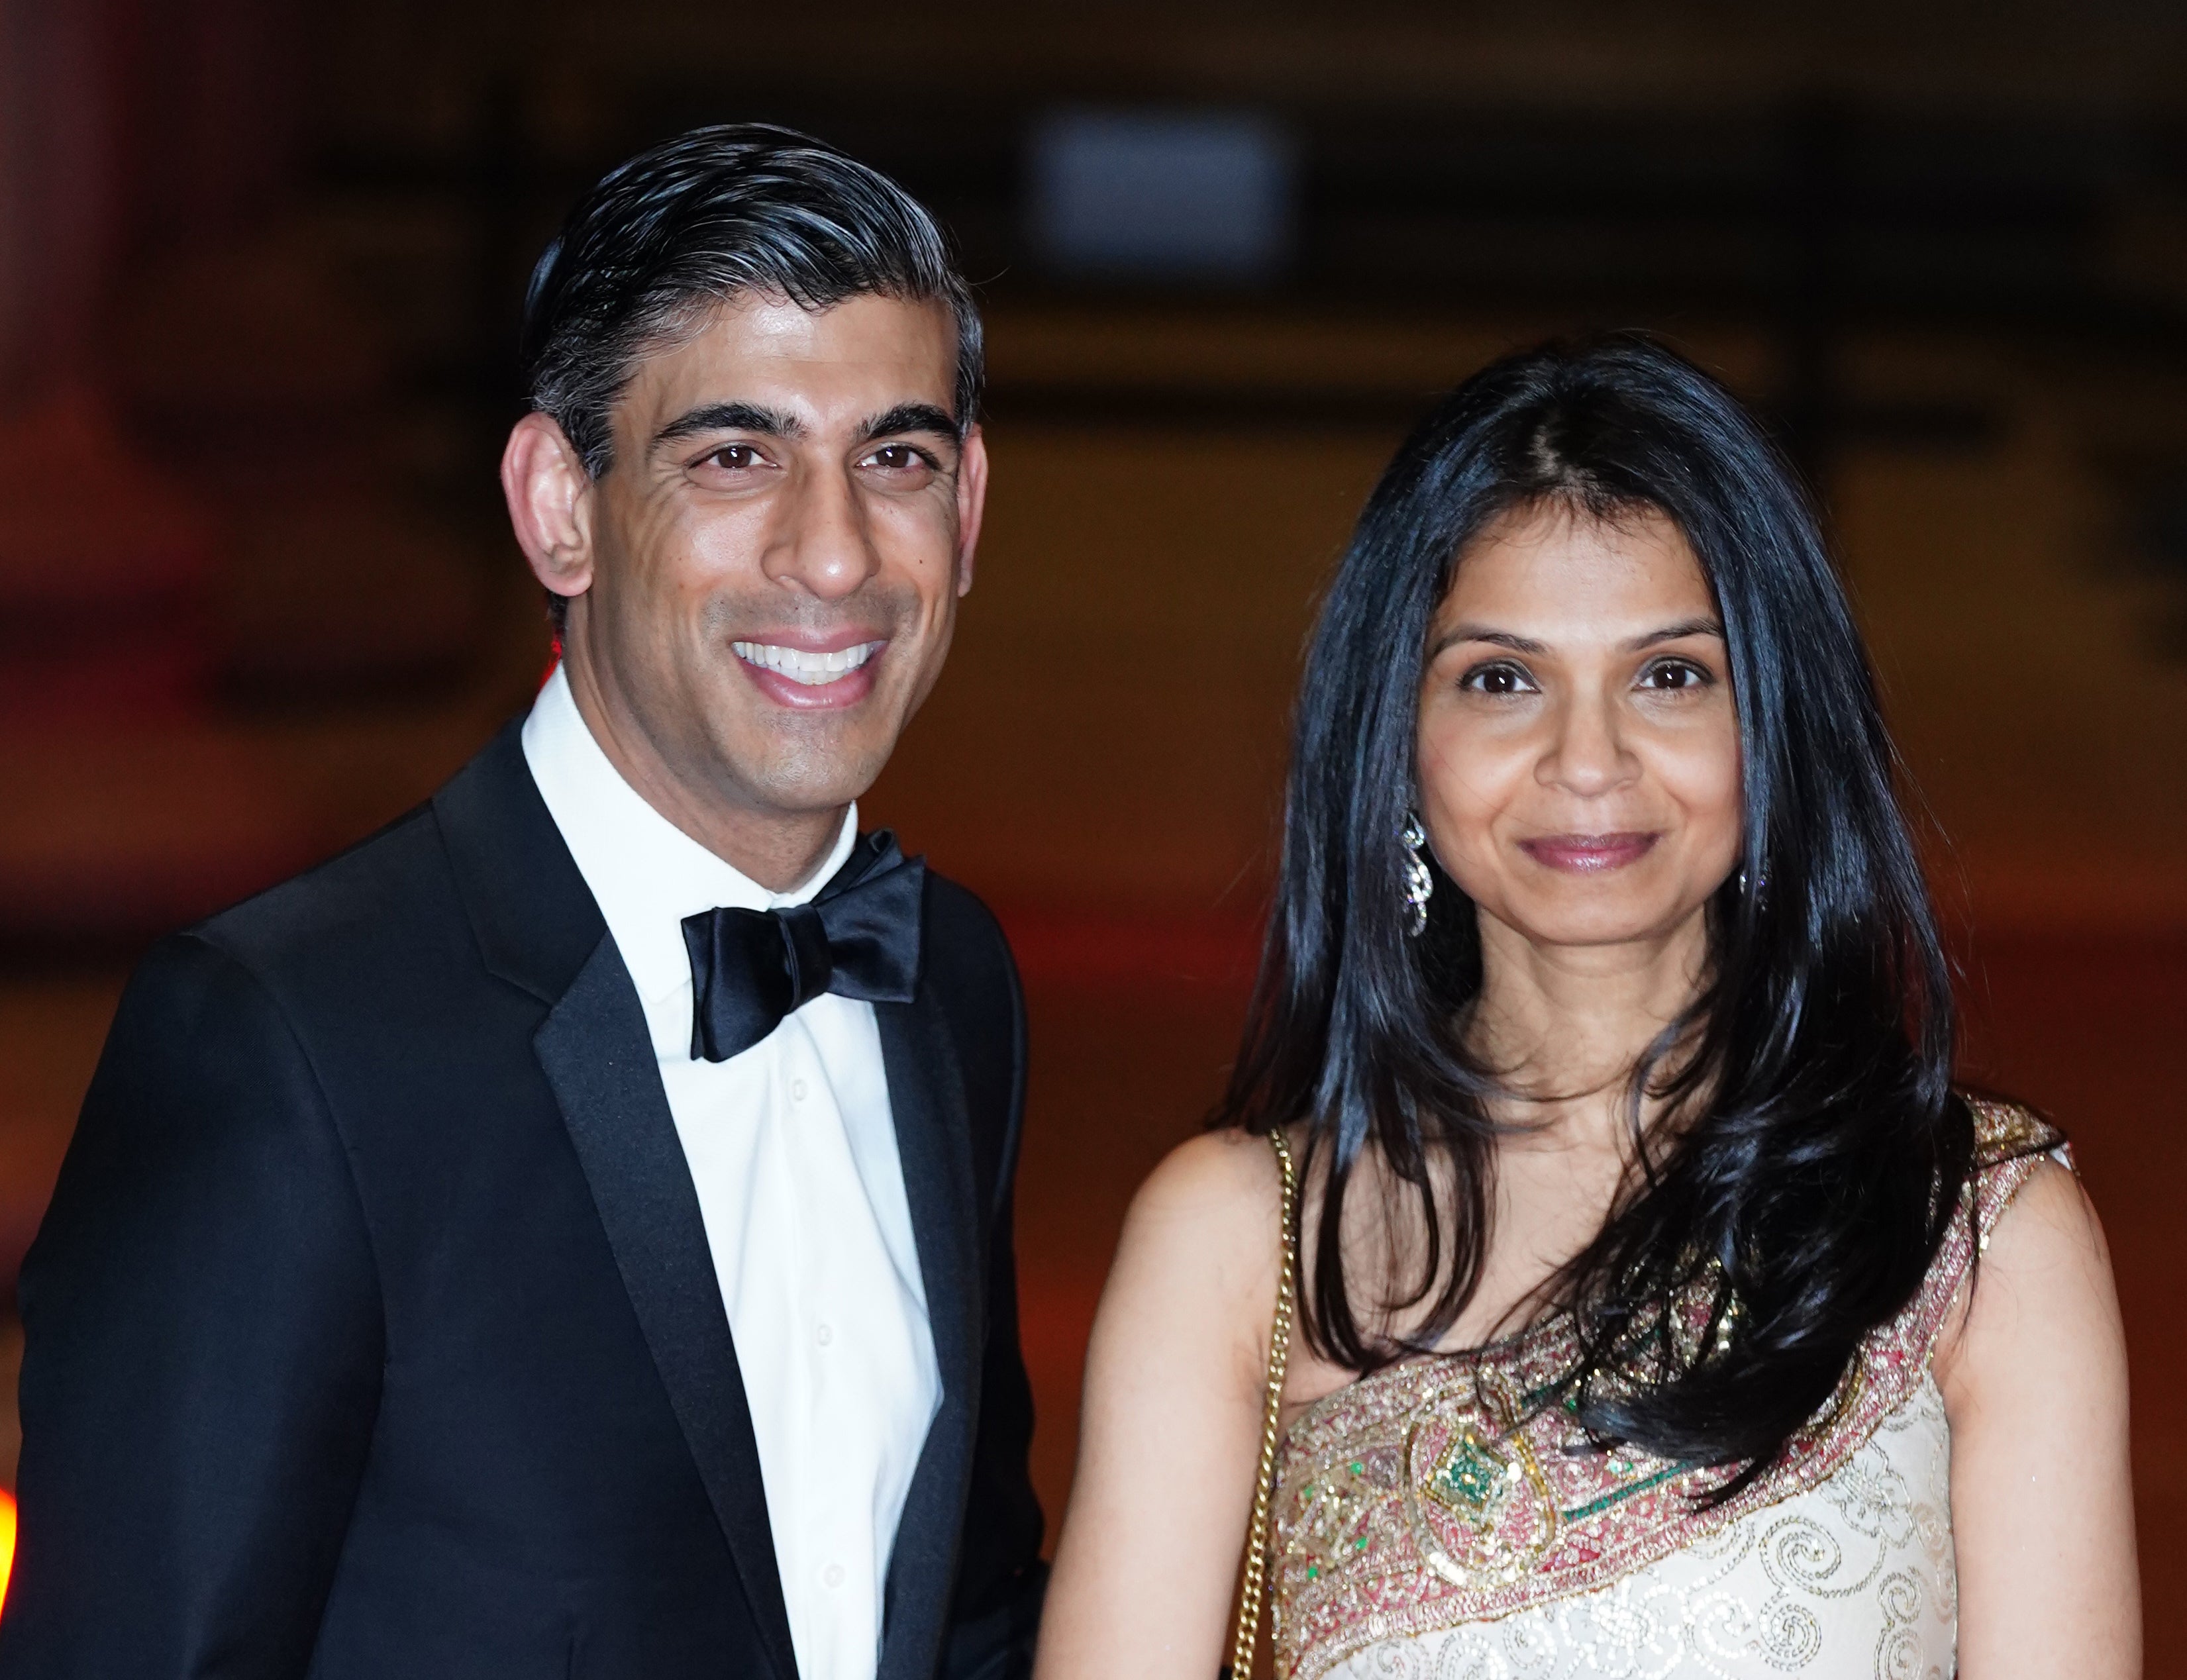 Rishi Sunak’s wife, Akshata Murty, has revealed she is treated as non-domiciled for UK tax purposes because of her Indian citizenship (Ian West/PA)